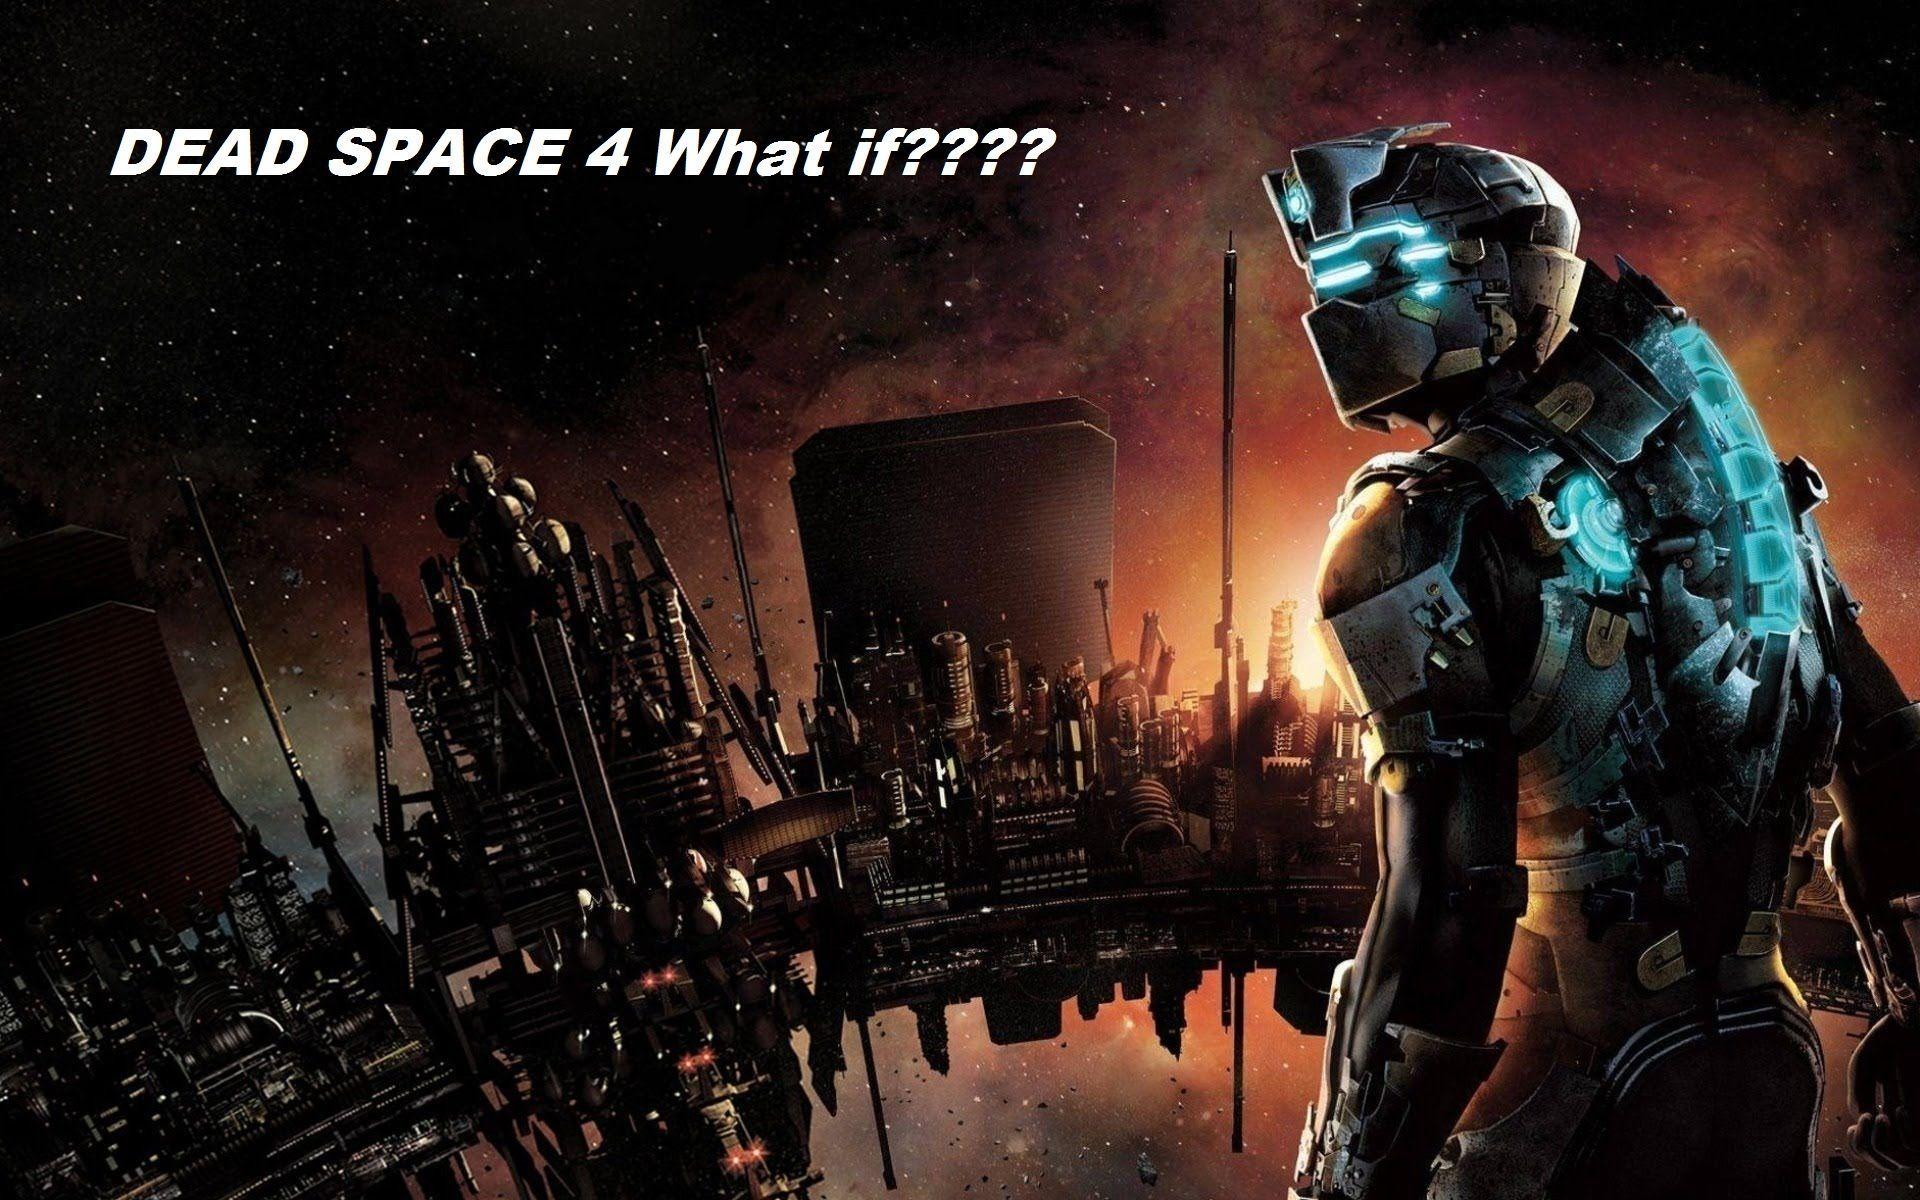 What if there was a Dead Space 4? What would happen? Why did